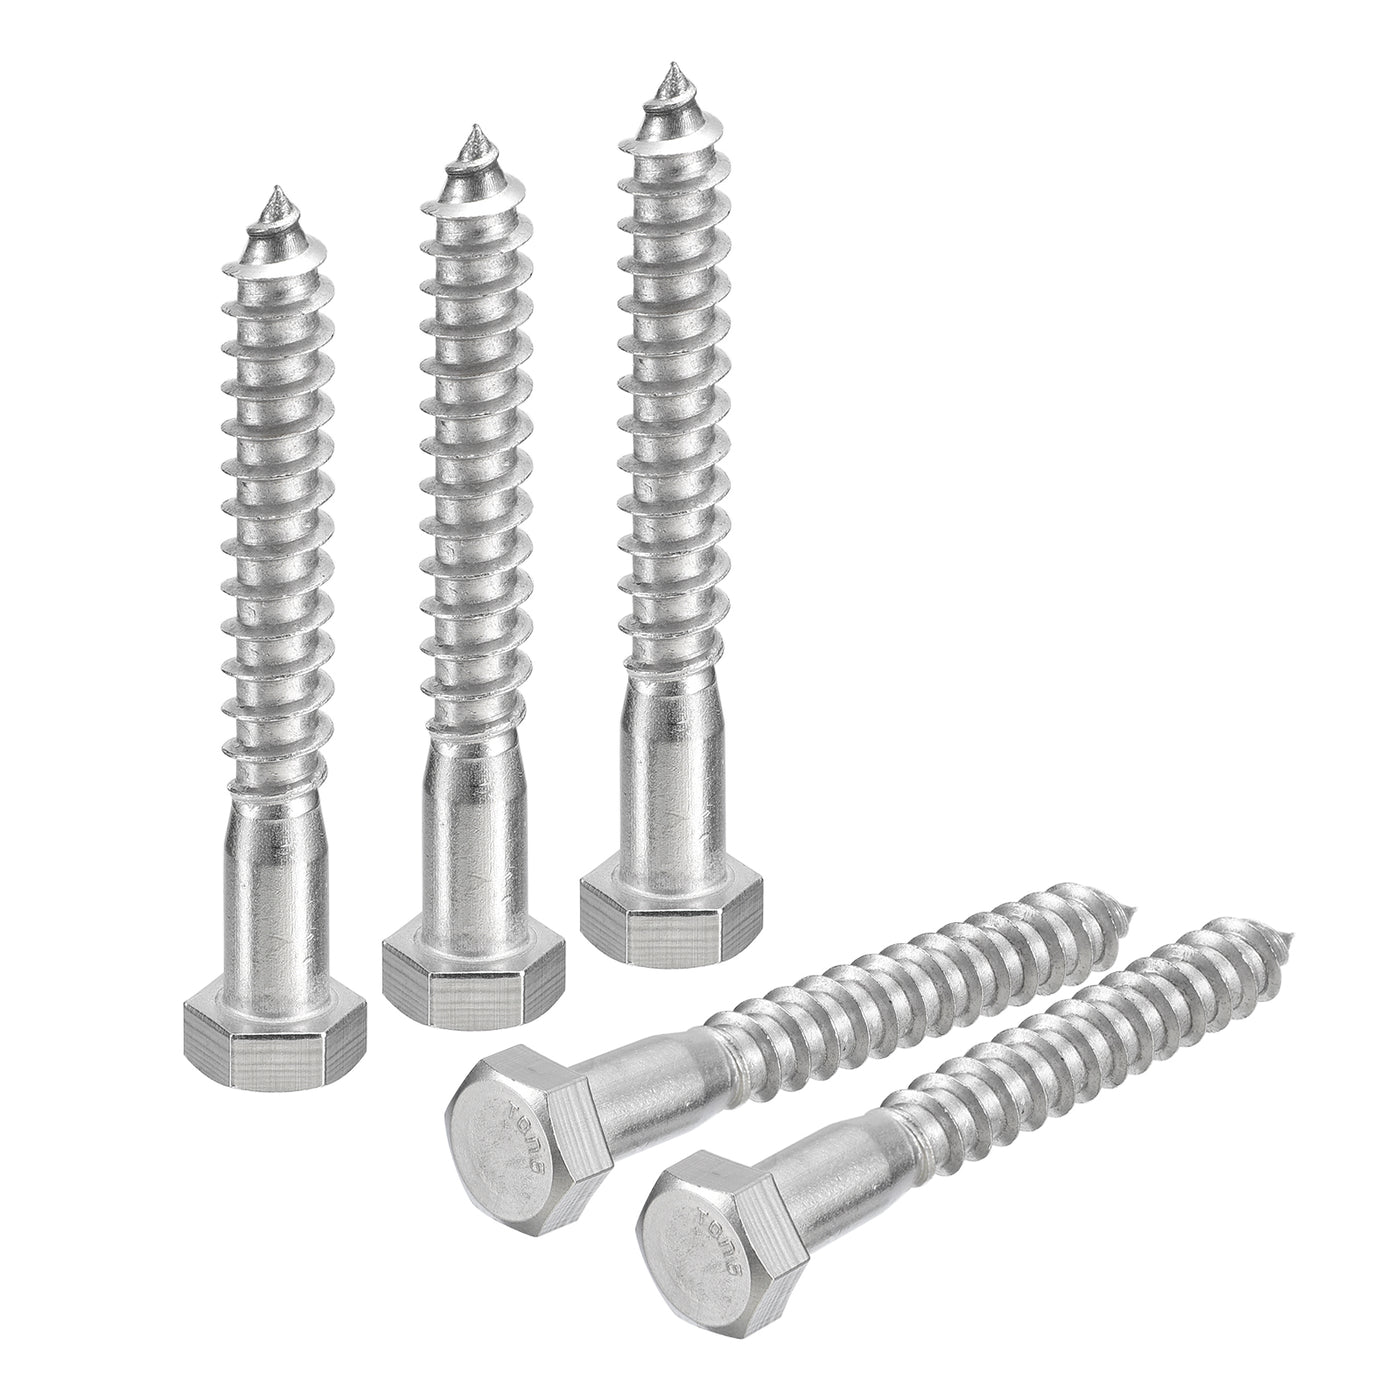 uxcell Uxcell Hex Head Lag Screws Bolts, 10pcs 3/8" x 3" 304 Stainless Steel Wood Screws